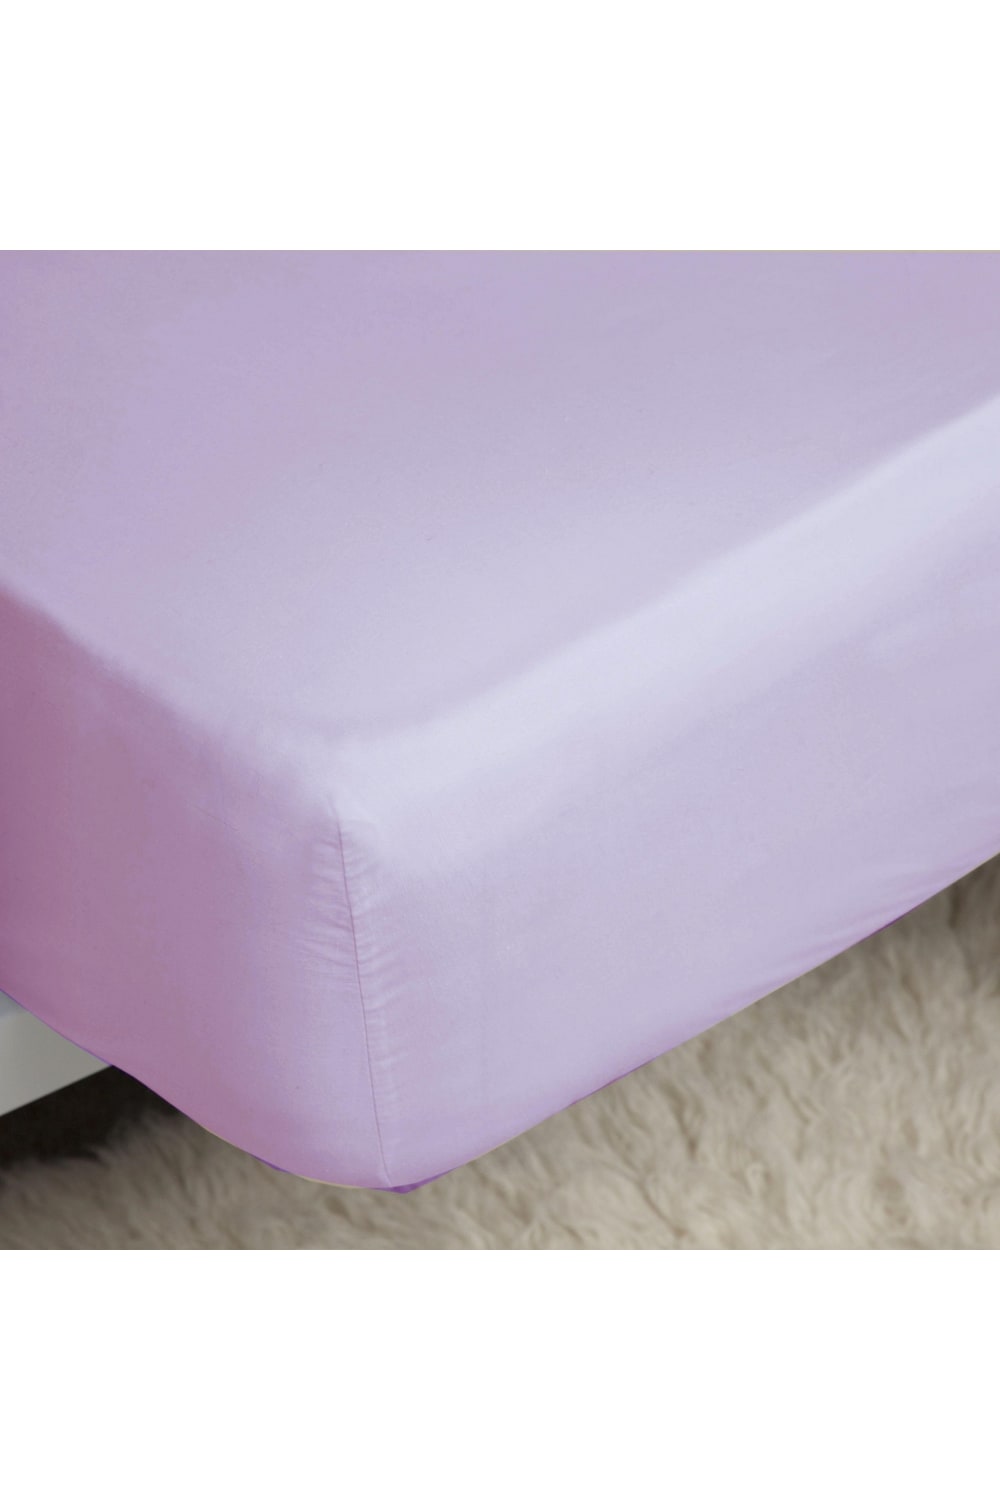 Belledorm 200 Thread Count Cotton Percale Deep Fitted Sheet (Lilac) (Queen) (UK - Kingsize)